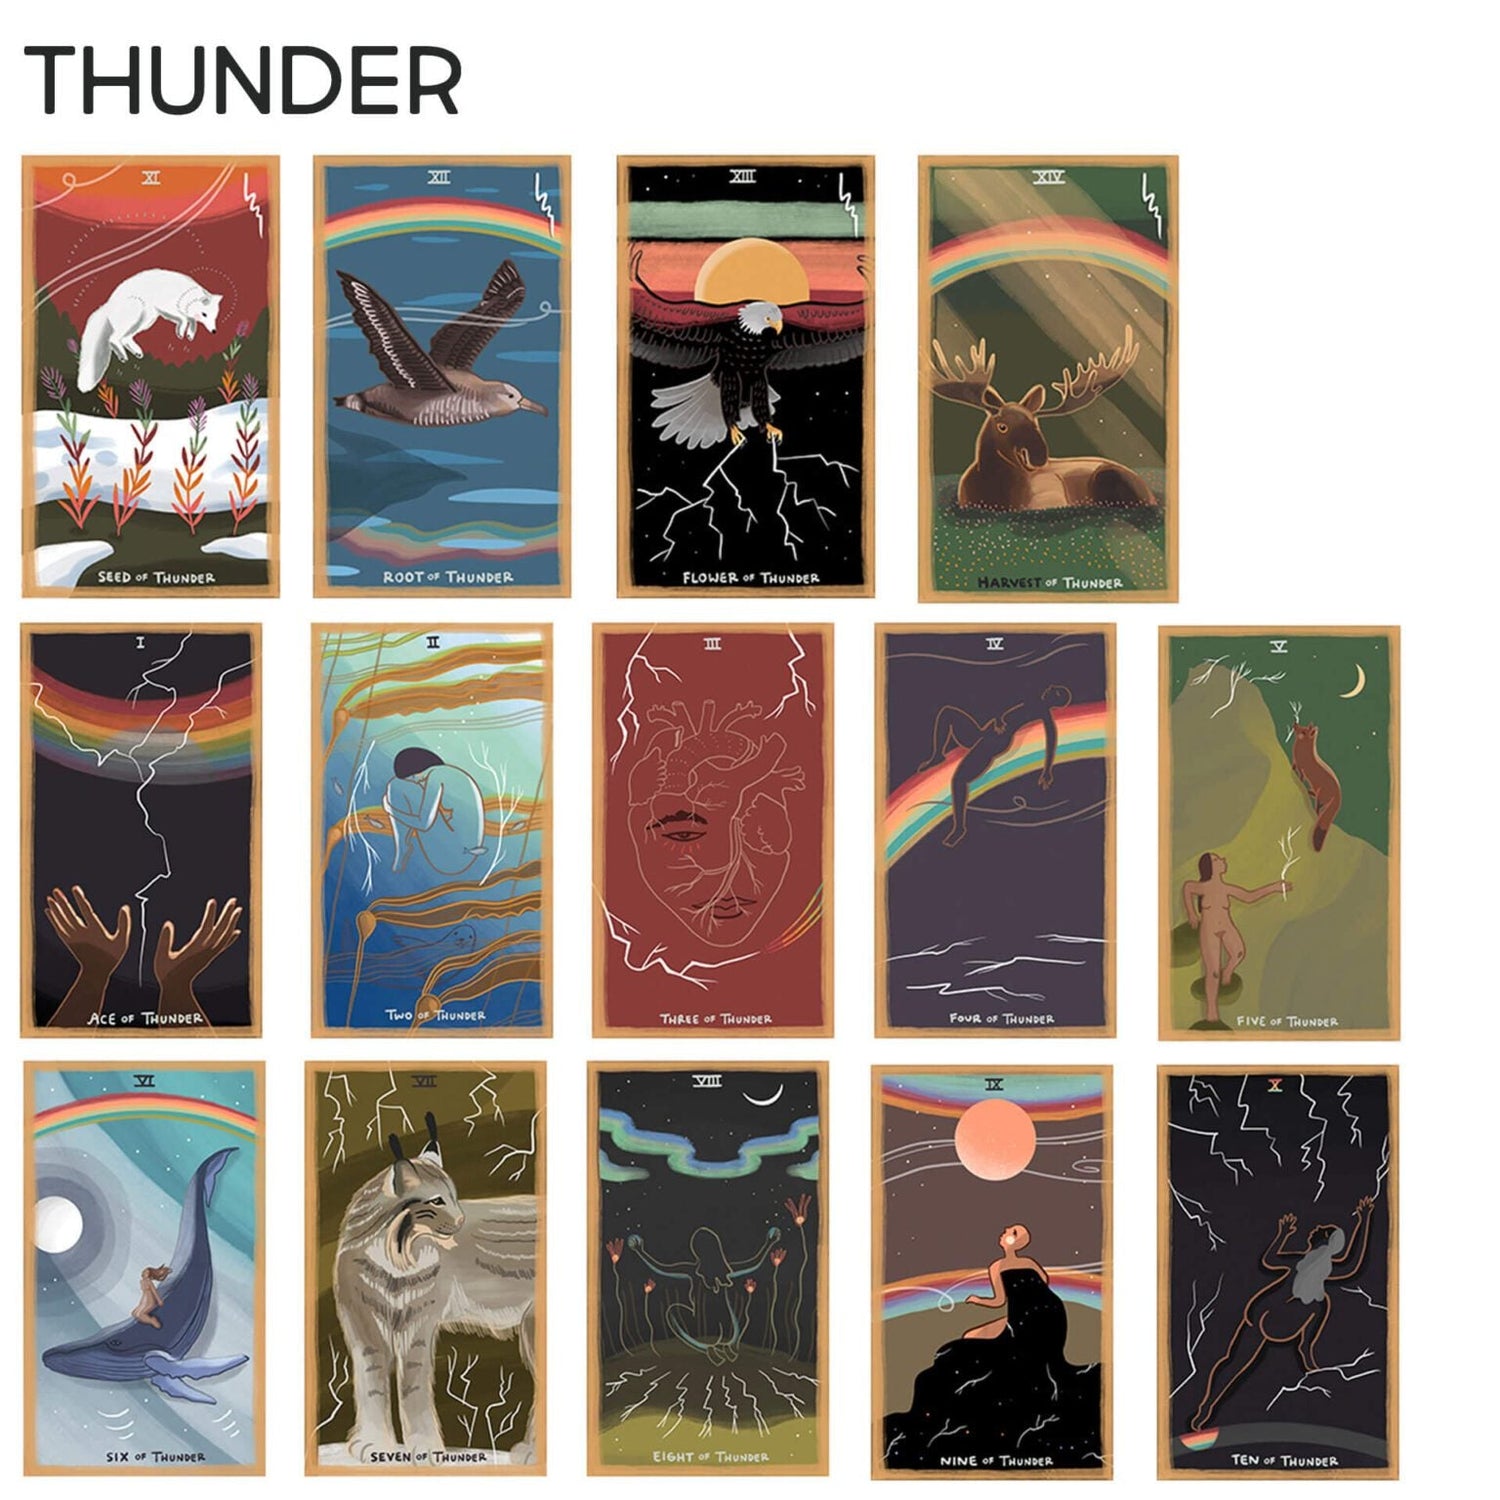 The Thunder cards from the Gentle Tarot deck.